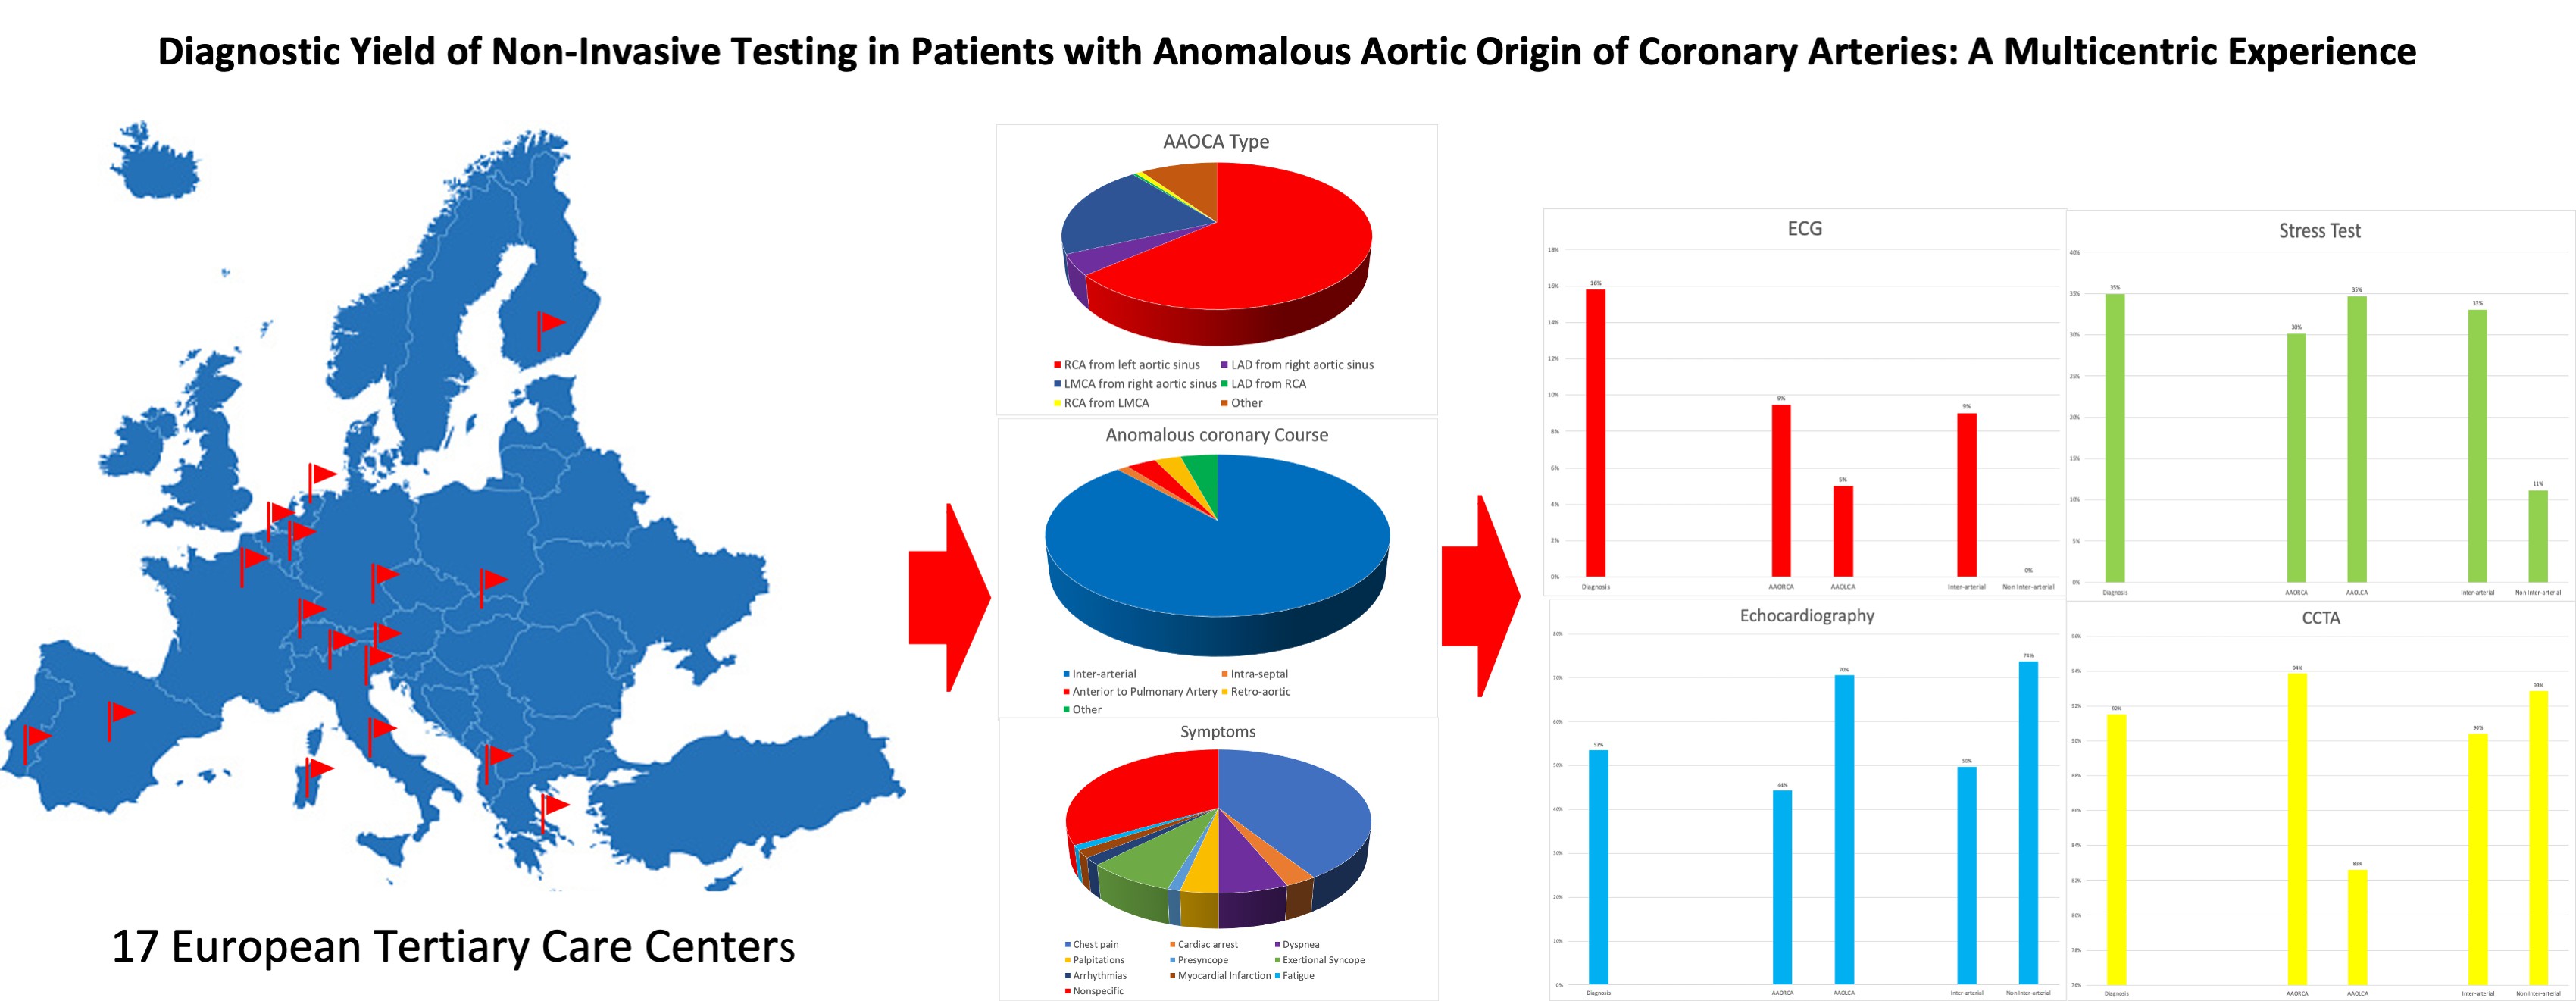 Diagnostic Yield of Non-Invasive Testing in Patients with Anomalous Aortic Origin of Coronary Arteries: A Multicentric Experience